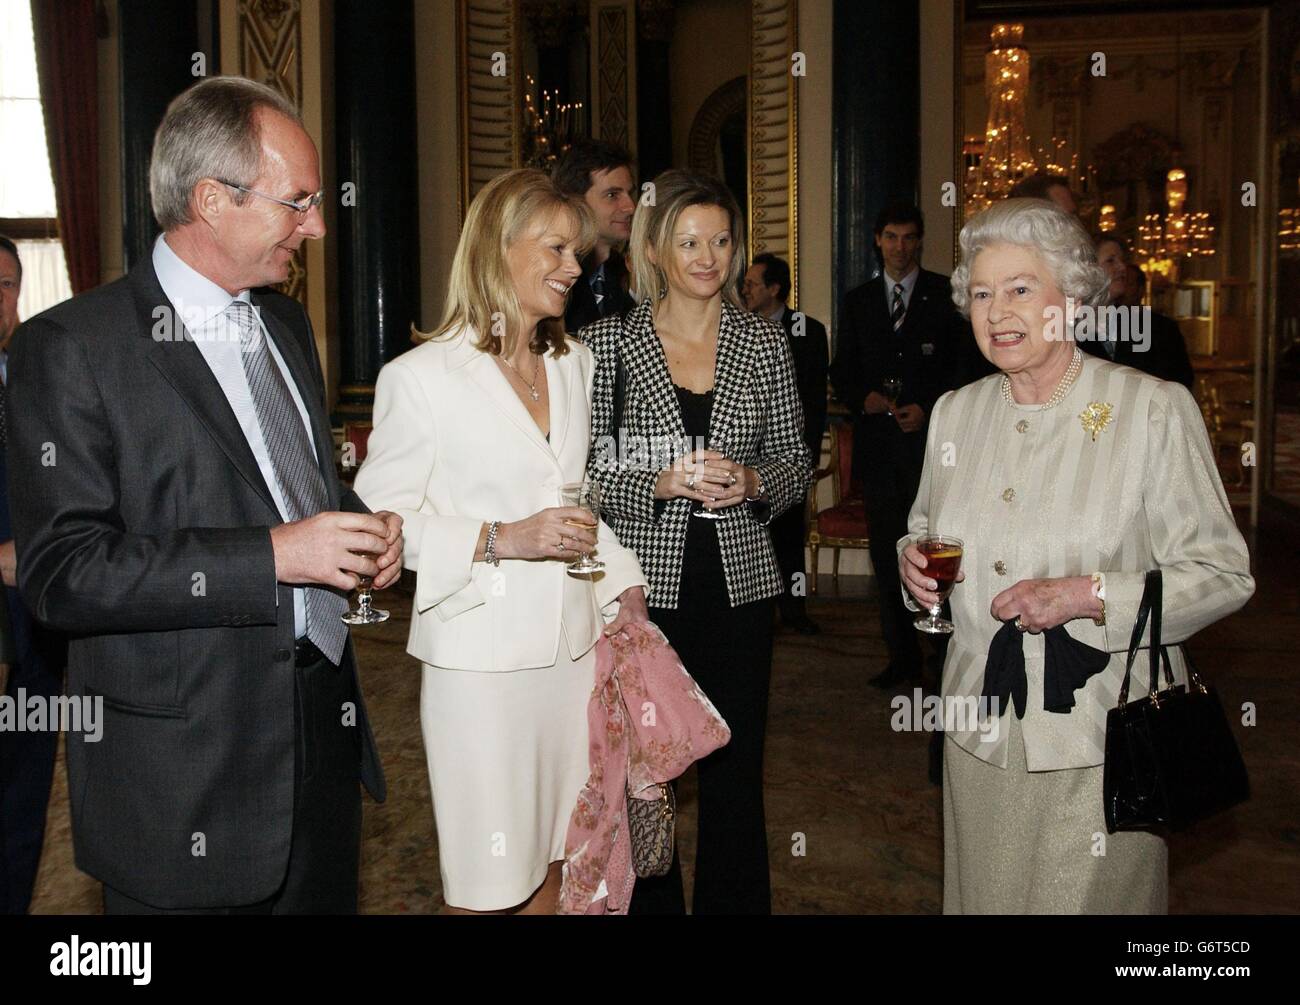 Britain's Queen Elizabeth II meets from left, England's Head Coach Sven-Goran Eriksson, Mrs Susan Davies - wife of David Davies, the FA's Executive Director - and Miss Jane Bateman, Head of International Relations at the English FA, during a reception at Buckingham Palace in London to mark the centenary of FIFA. Stock Photo